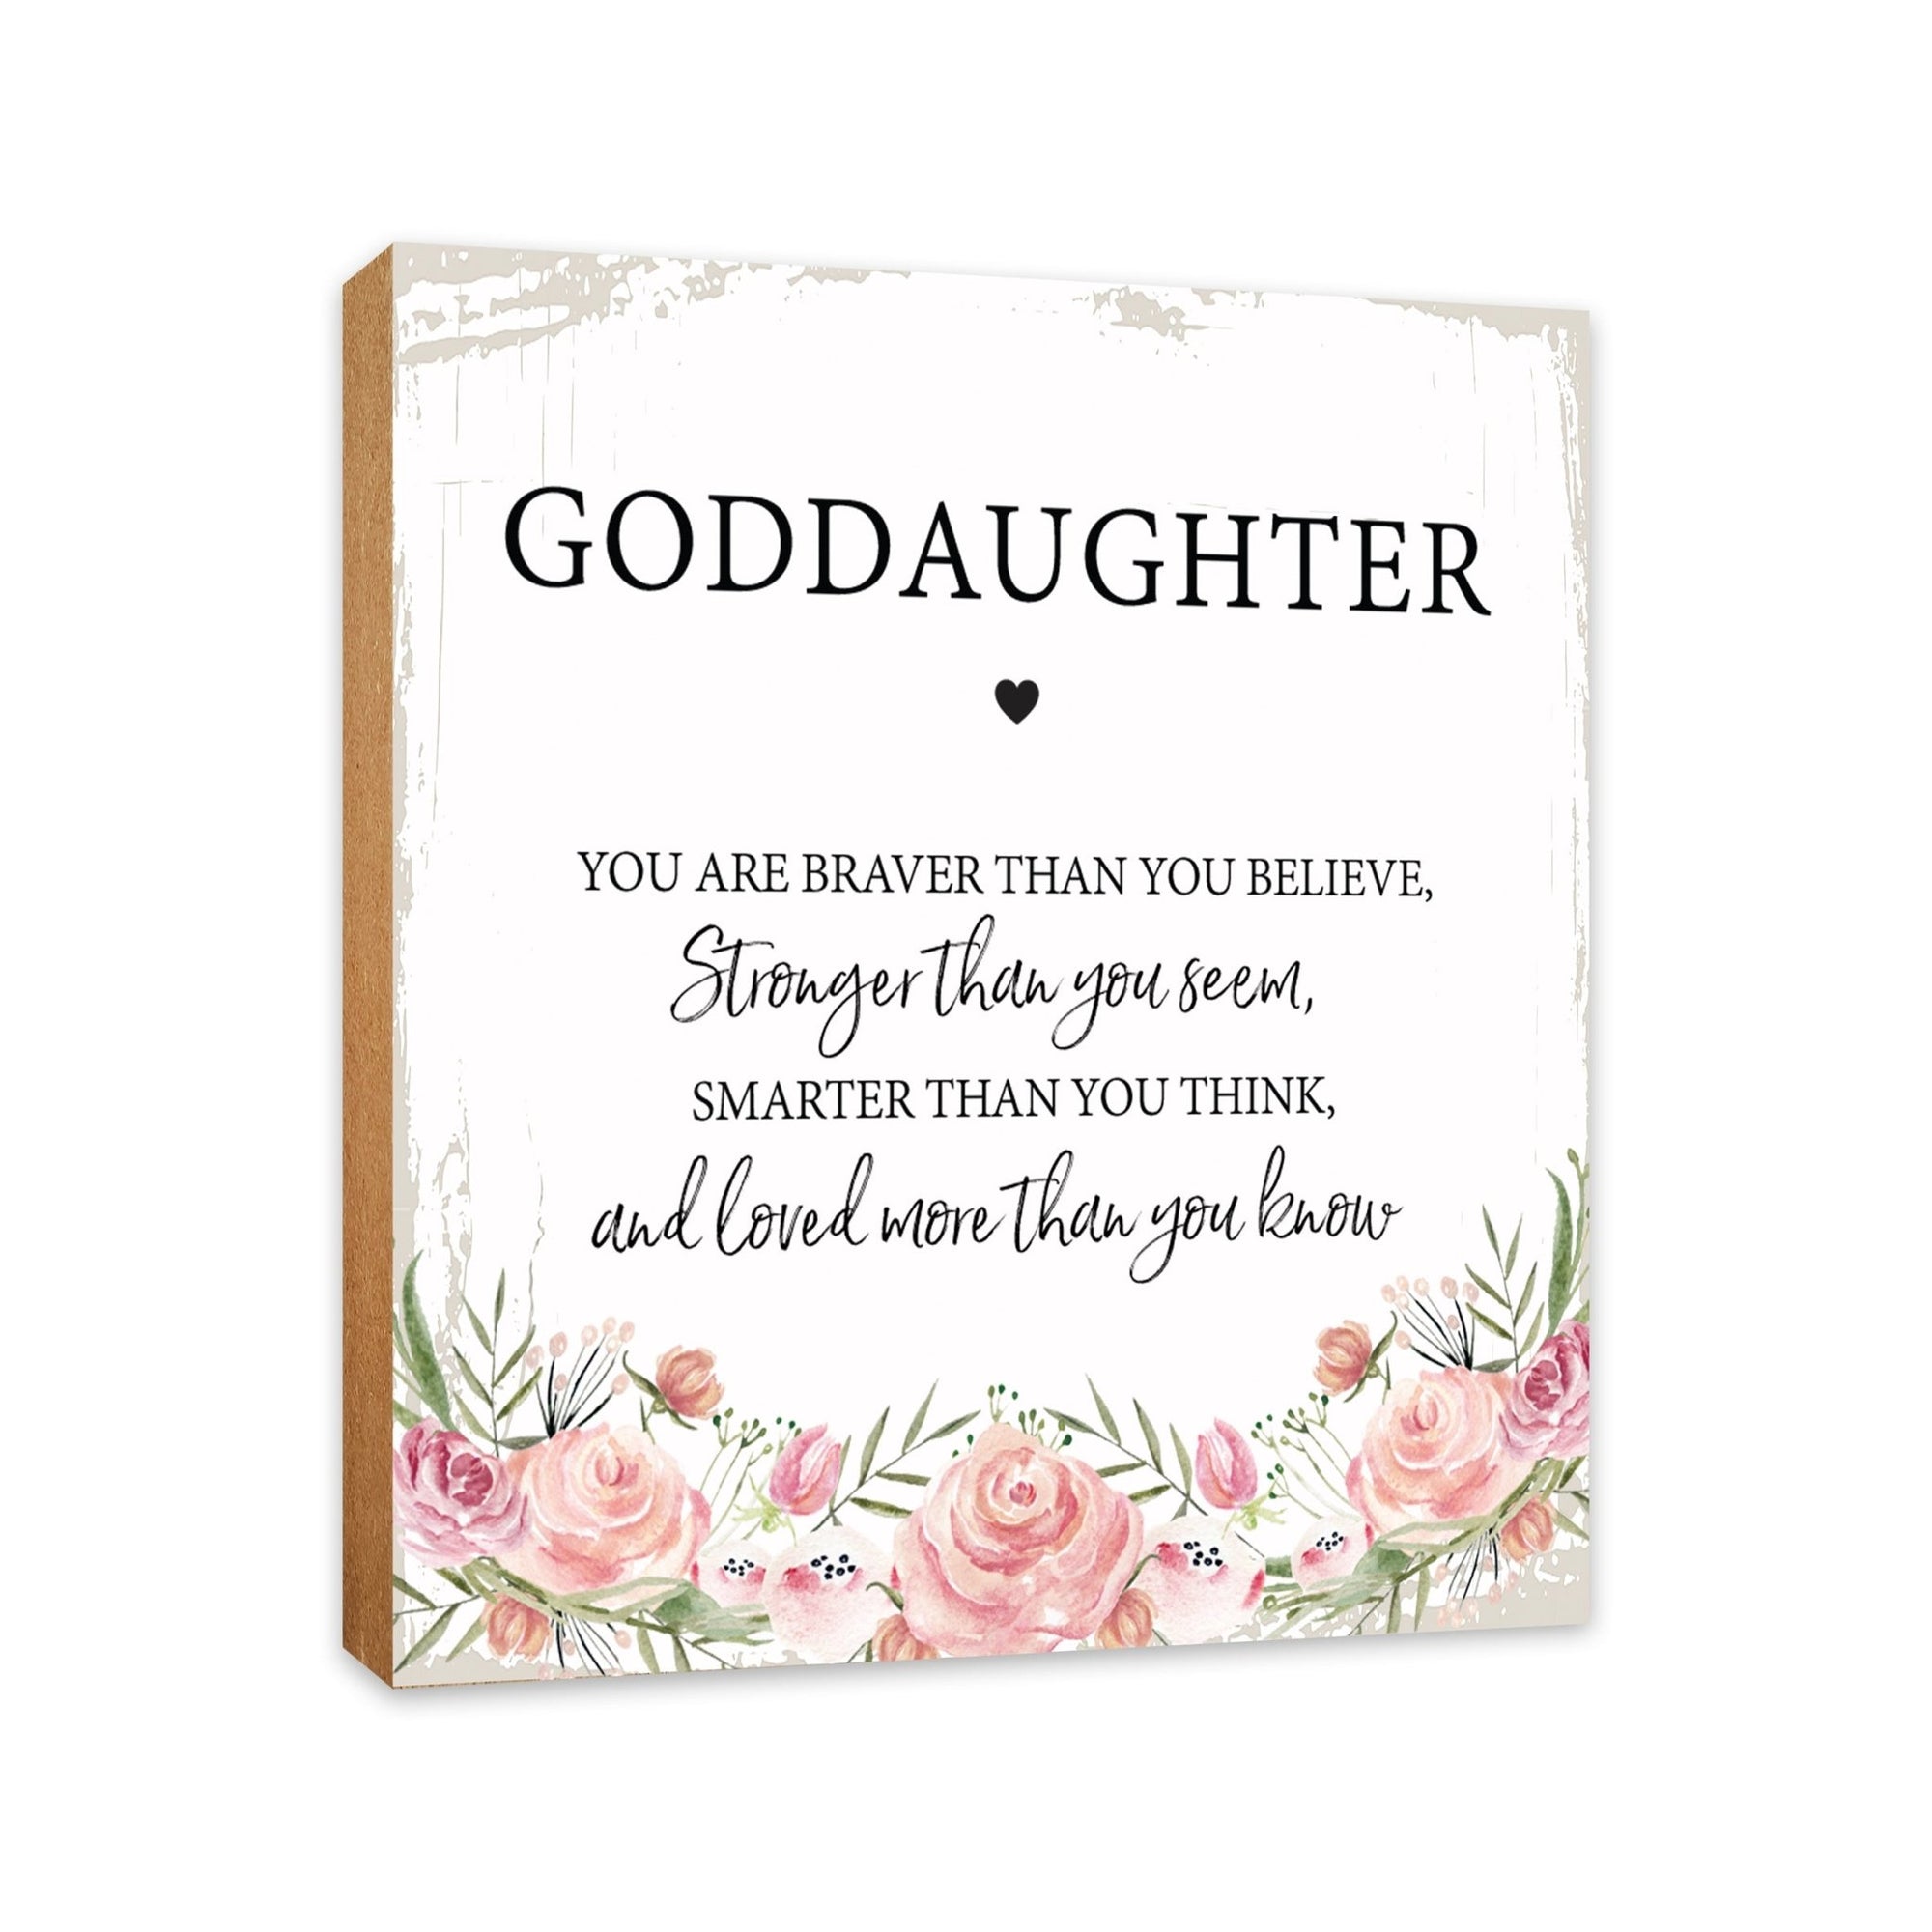 Goddaughter, You Are Braver Floral 6x6 Inches Wood Family Art Sign Tabletop and Shelving For Home Décor - LifeSong Milestones